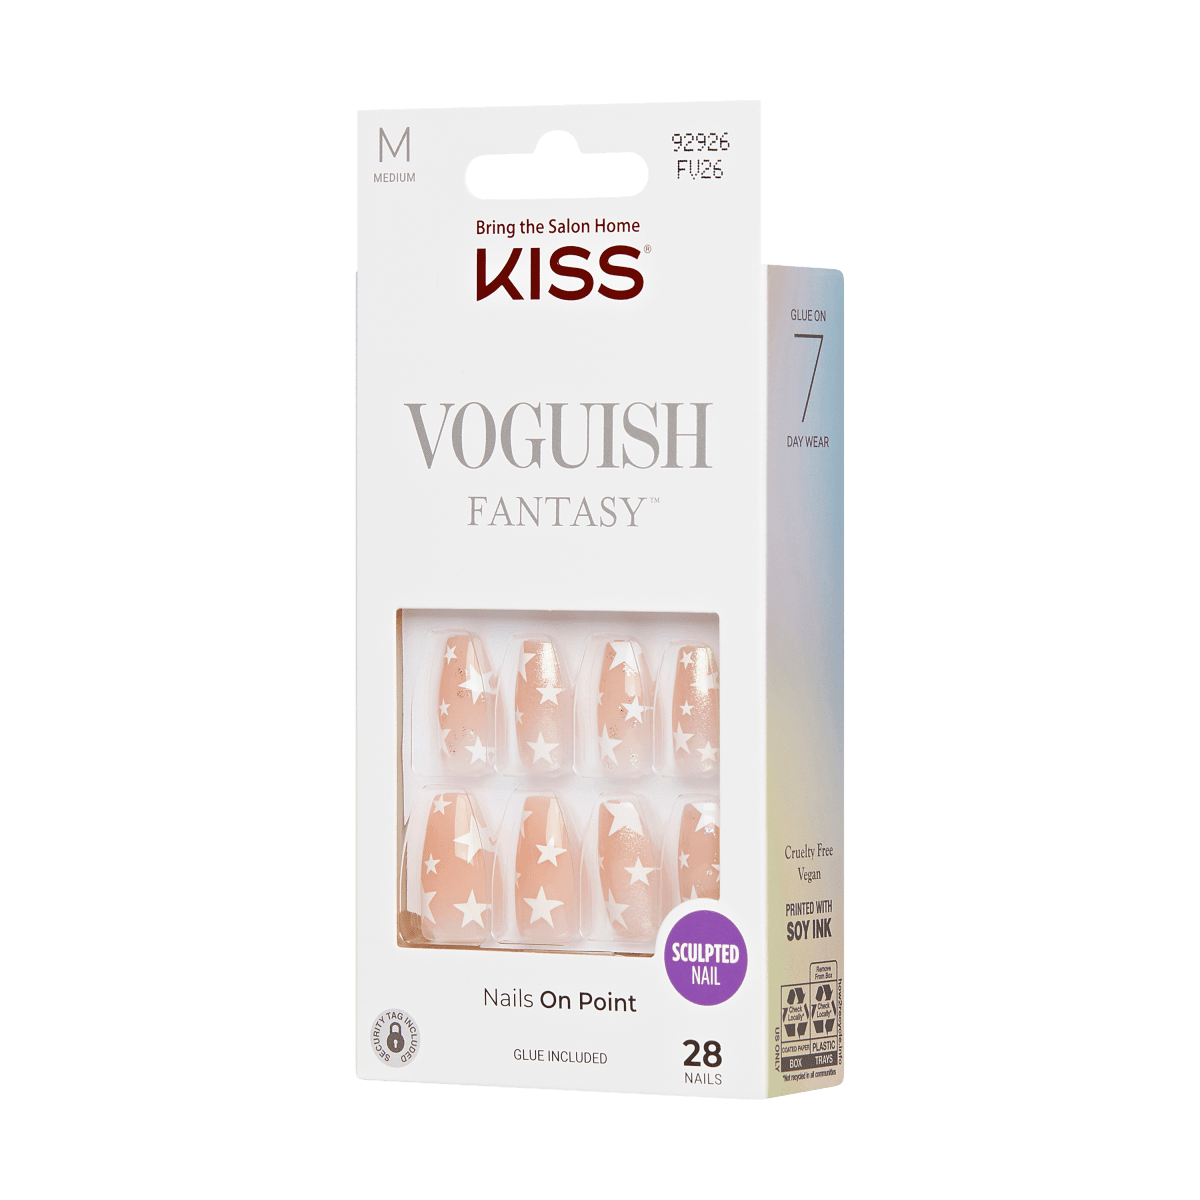 KISS Voguish Fantasy, Press-On Nails, To The Sea, Nude, Med Coffin, 28ct